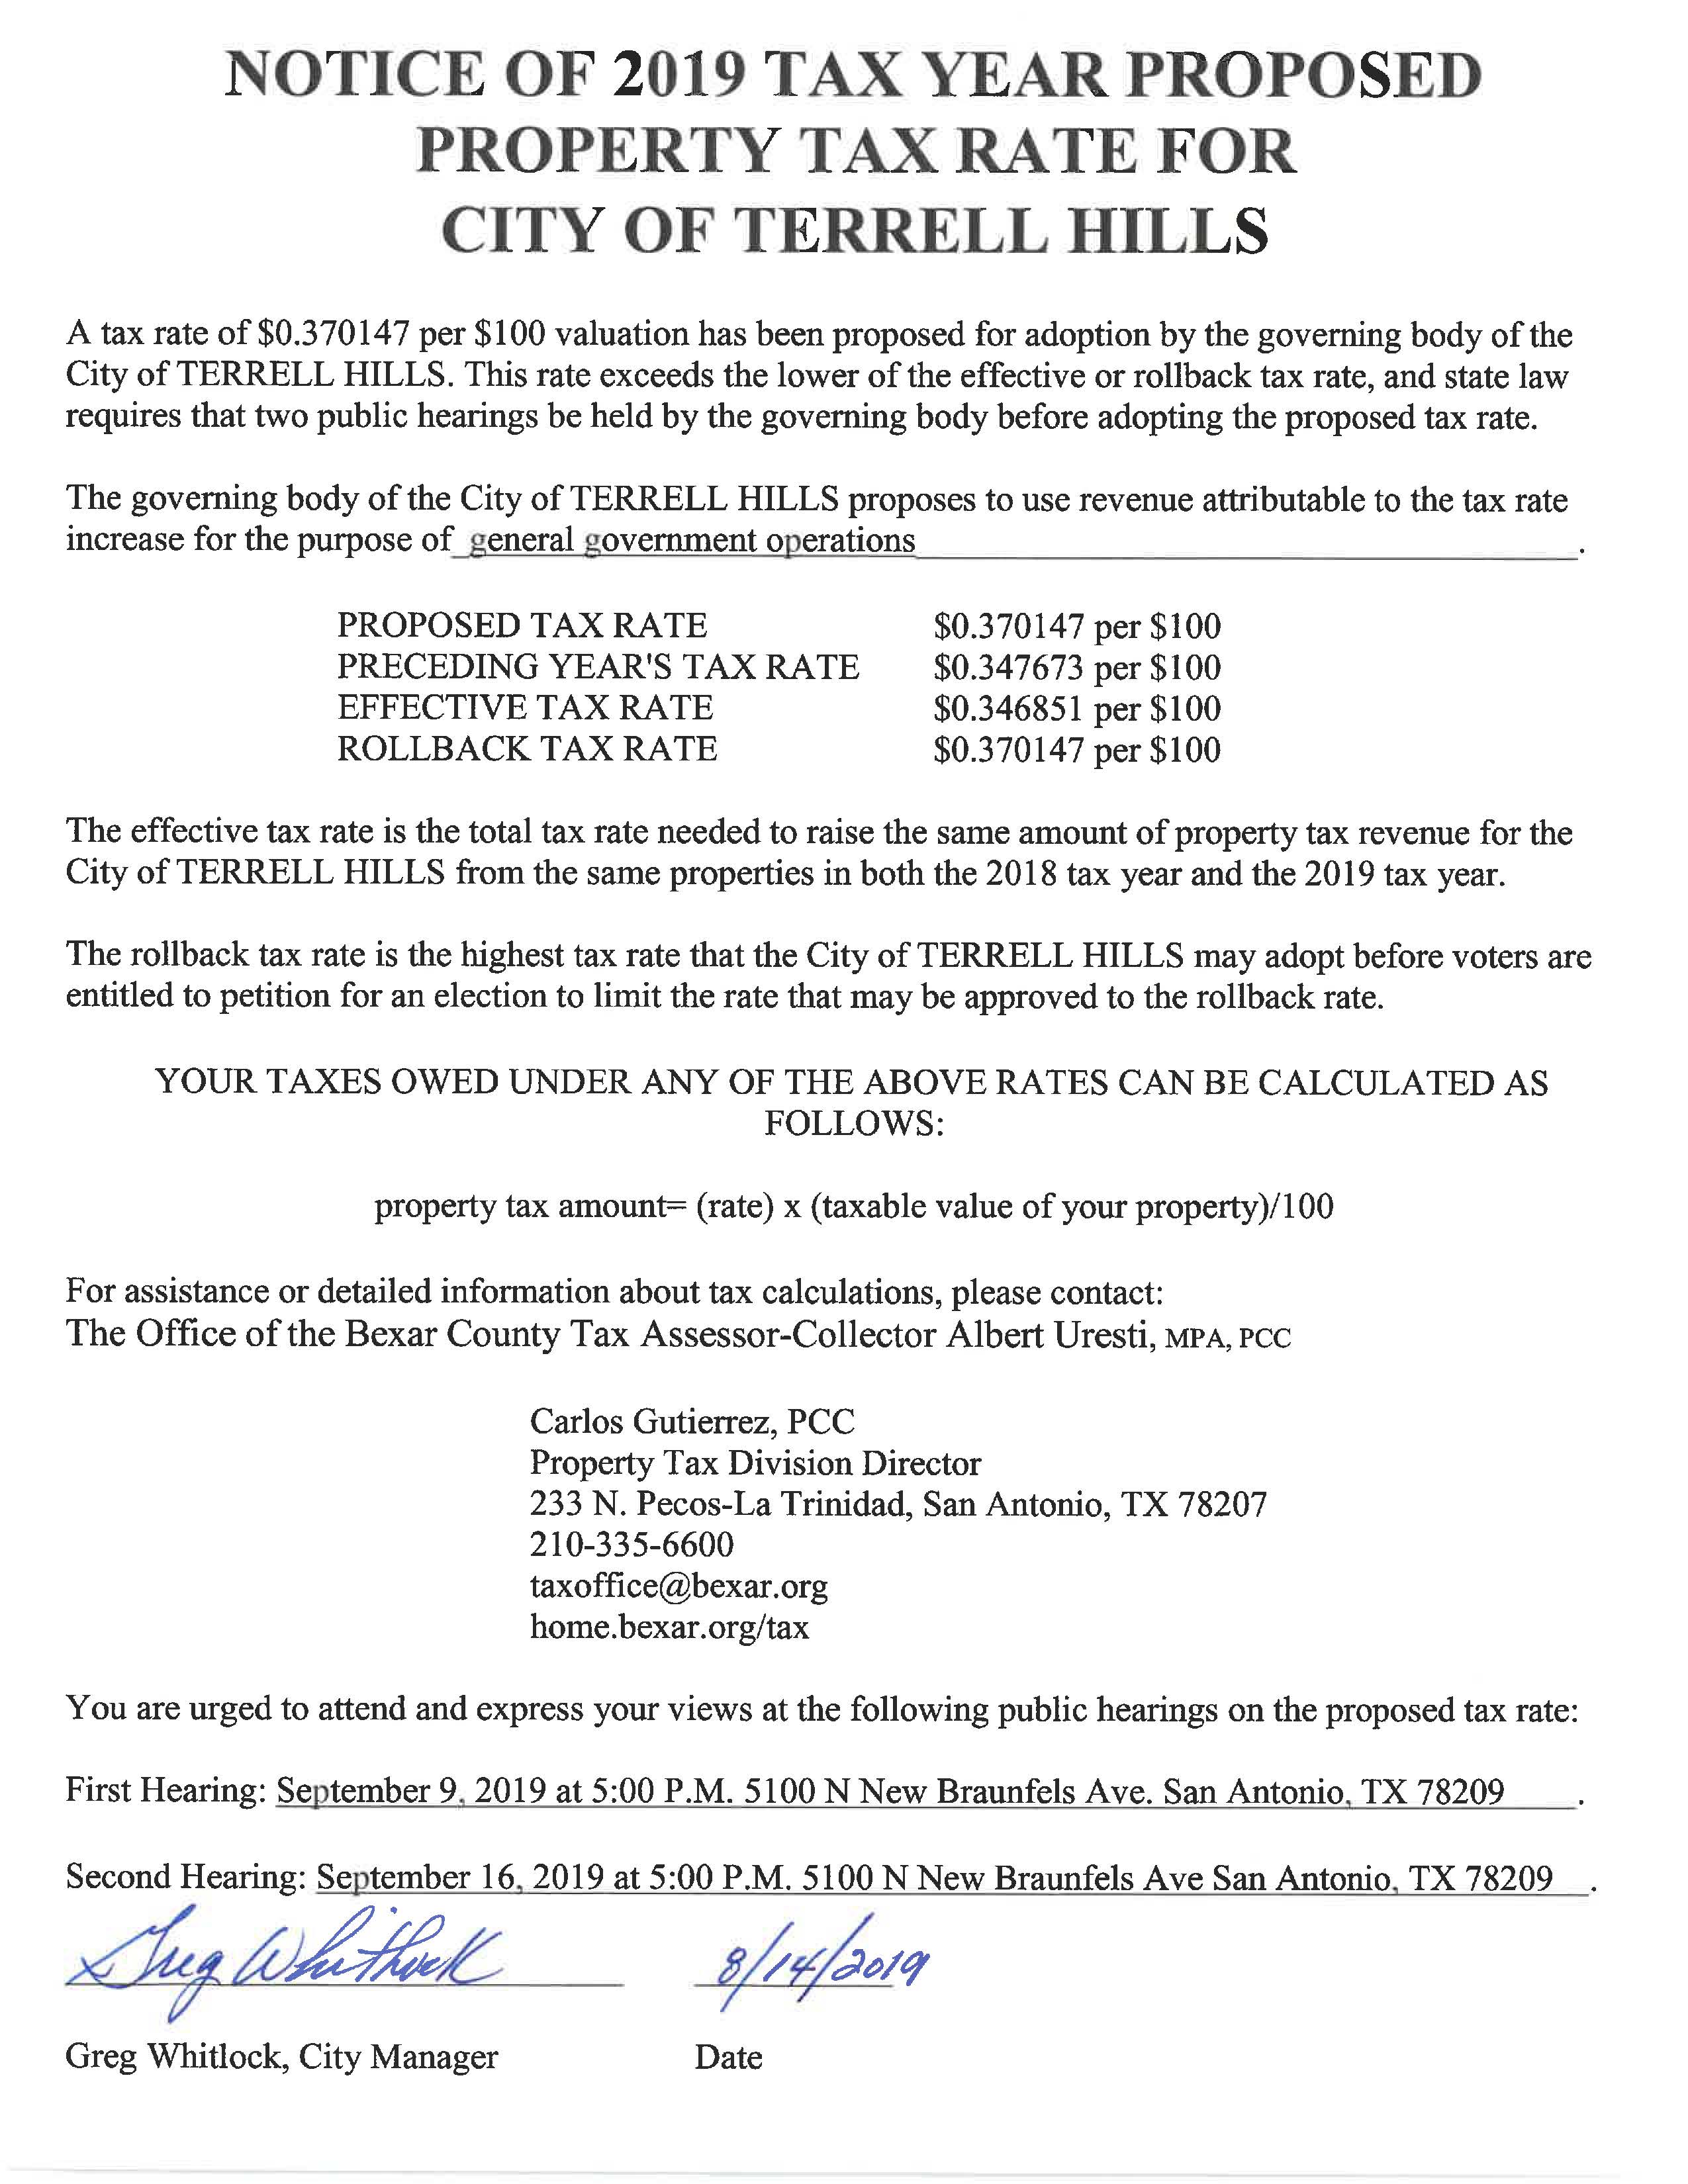 Notice of 2019 Tax Year Proposed Property Tax Rate